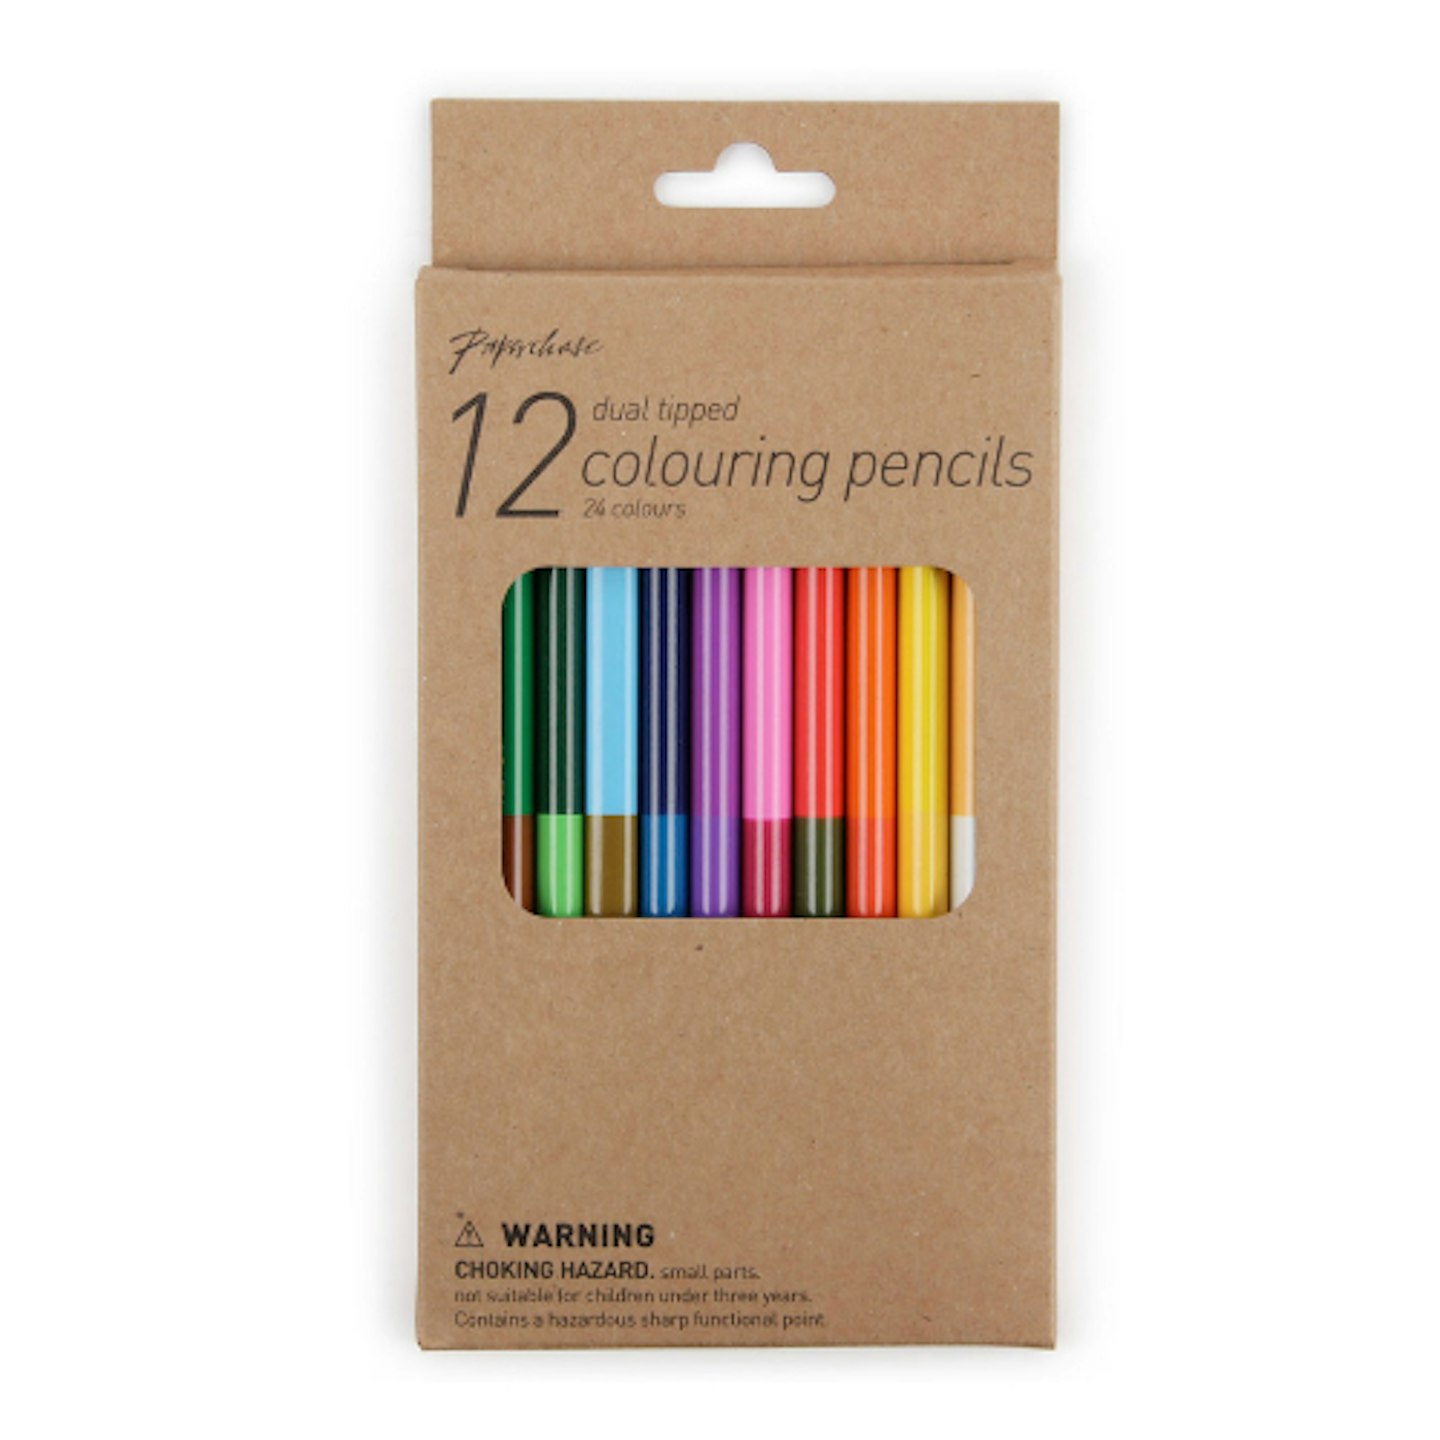 Paperchase Dual Ended Colouring Pencils